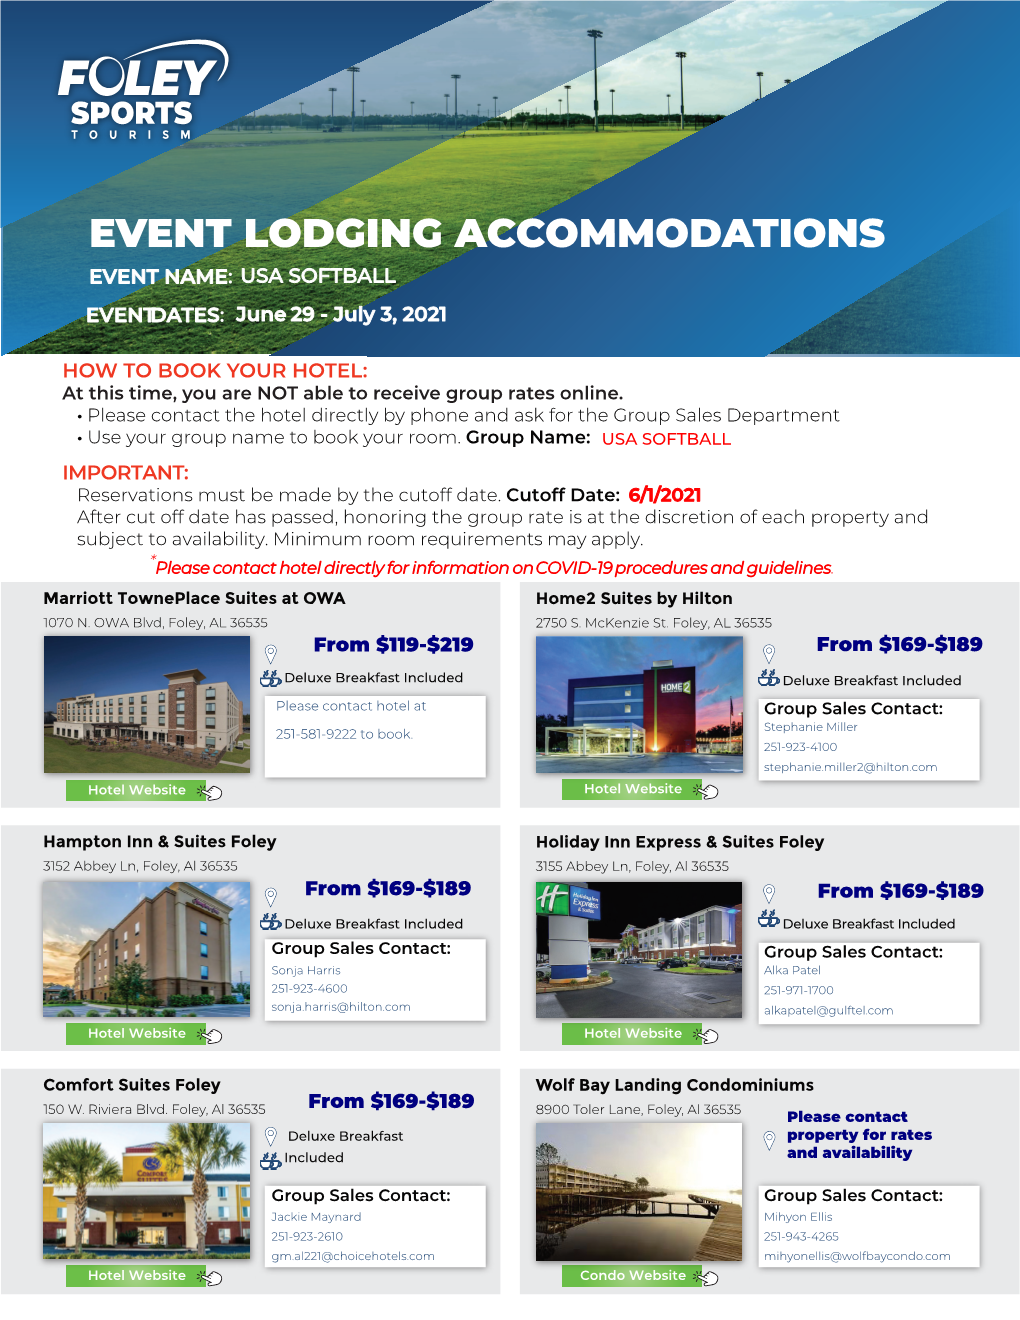 EVENT LODGING ACCOMMODATIONS EVENT NAME: USA SOFTBALL EVENTDATES : June 29 - July 3, 2021